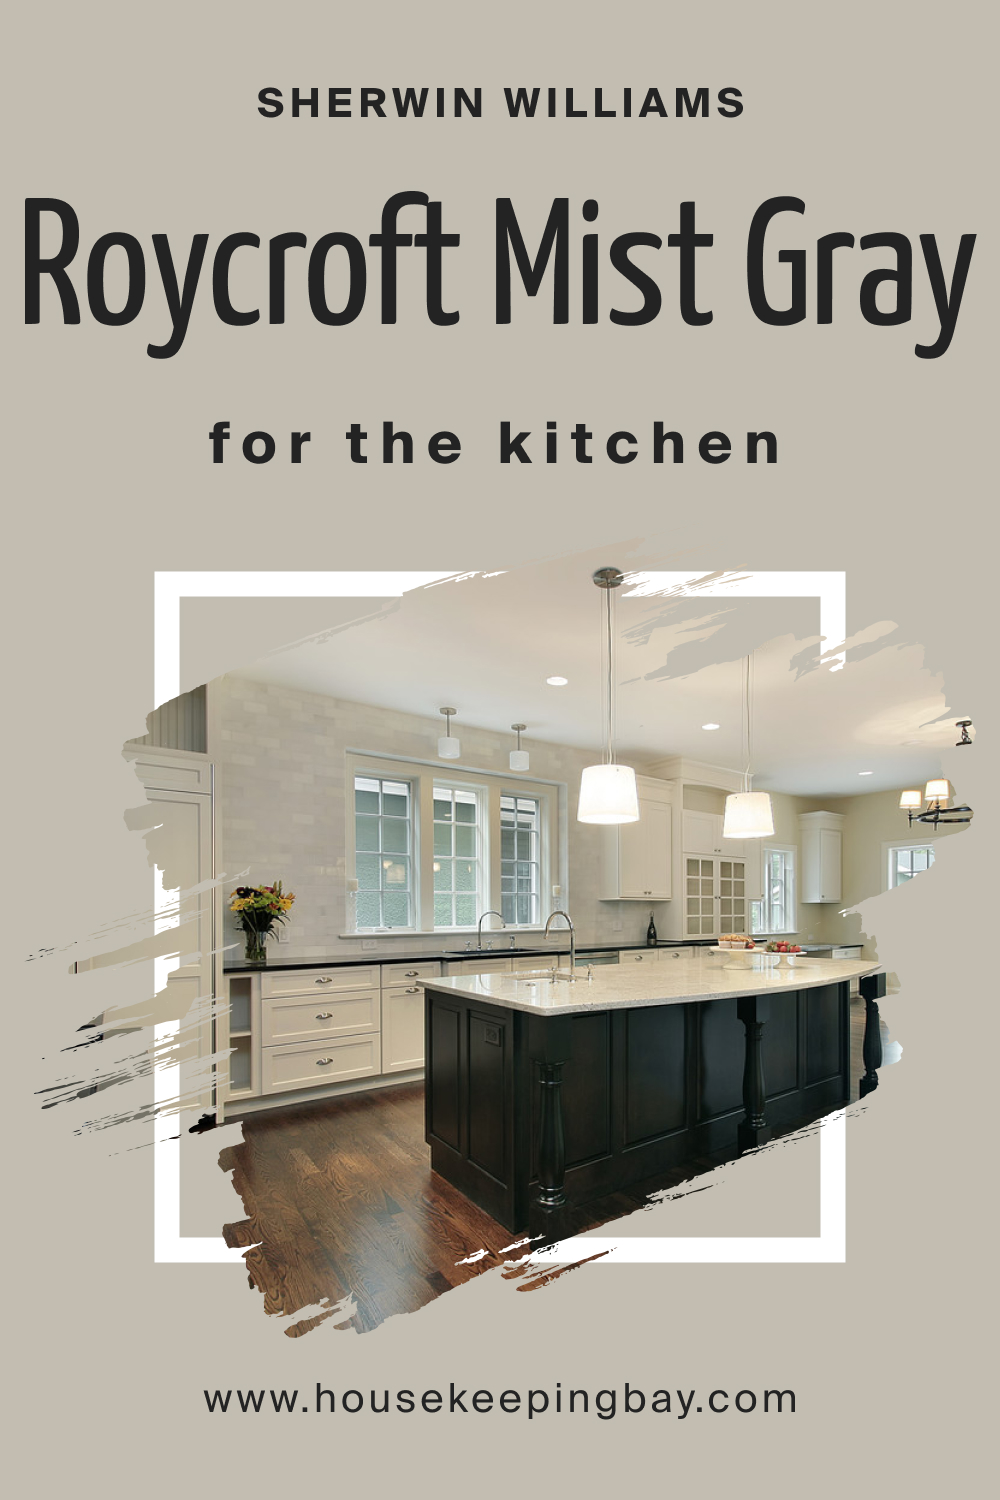 Sherwin Williams. SW 2844 Roycroft Mist Gray For the Kitchens